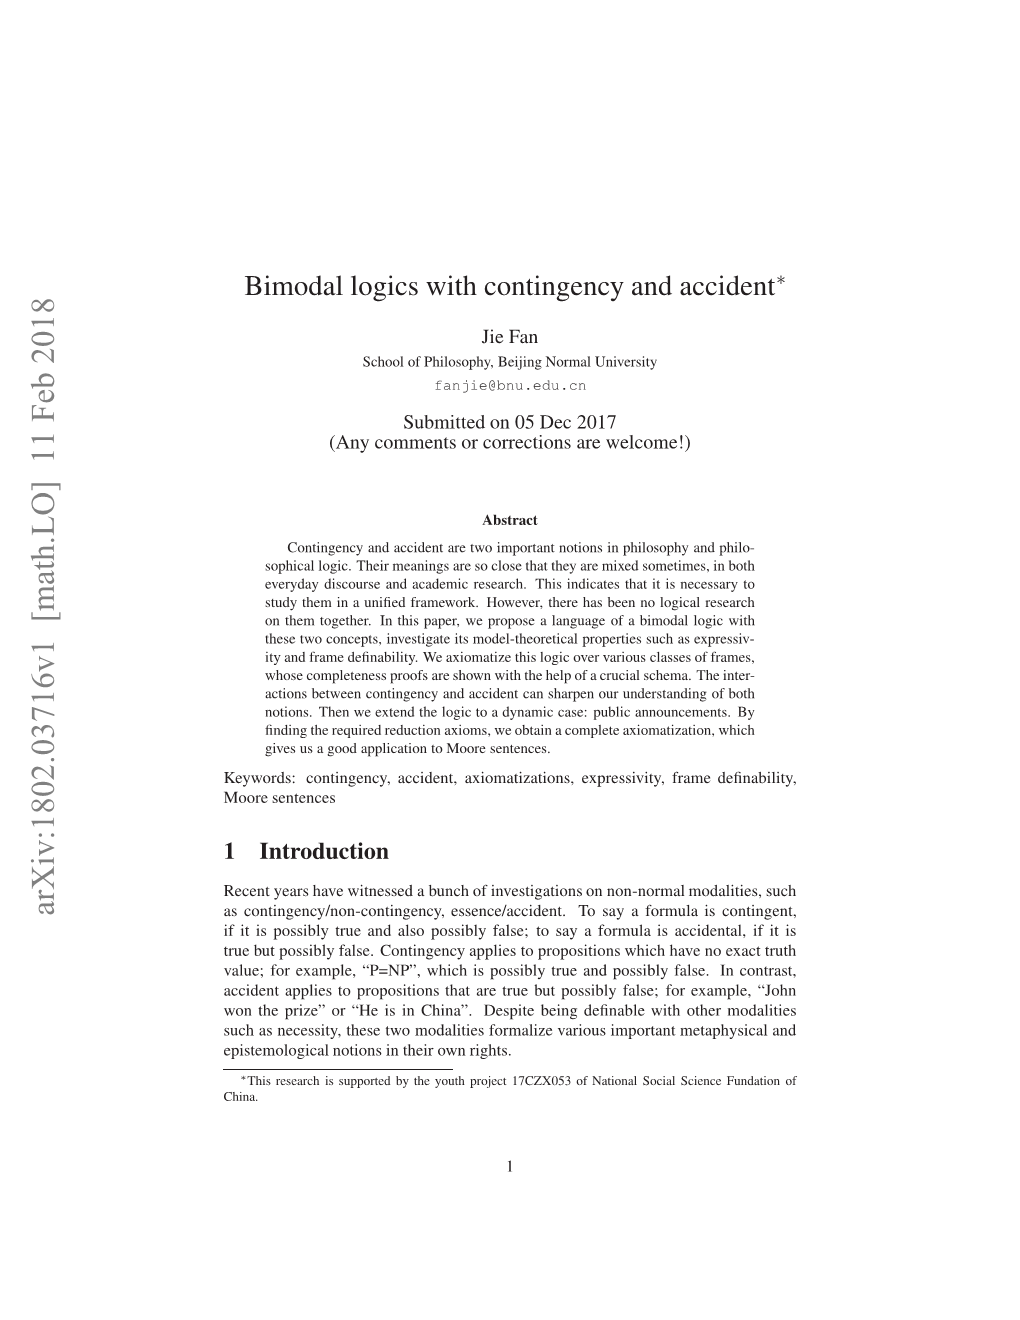 Bimodal Logics with Contingency and Accident